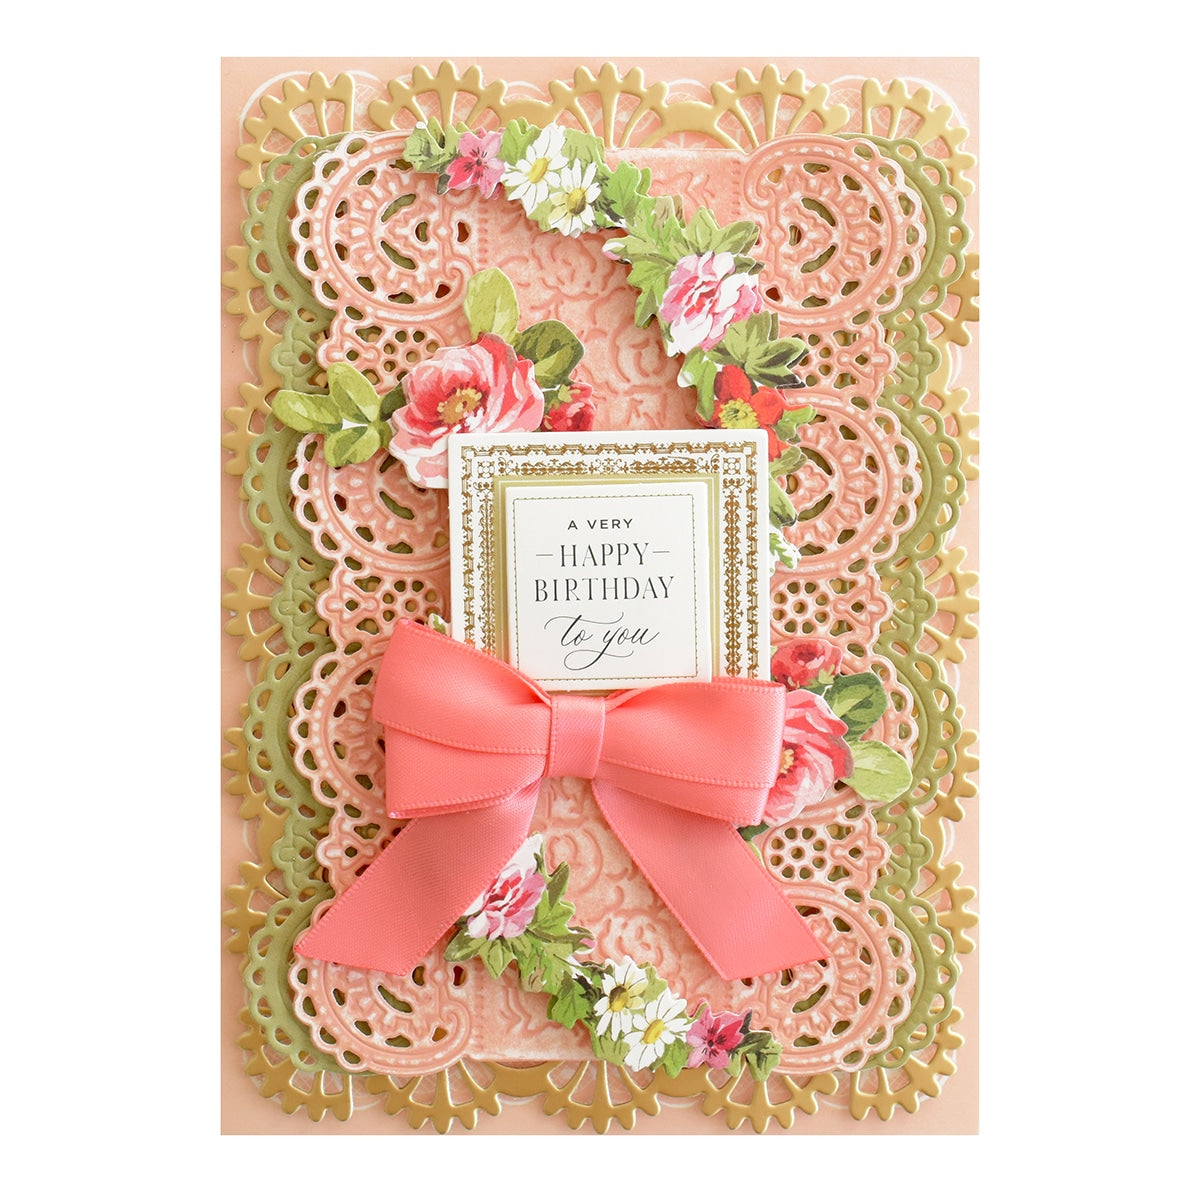 a card with a pink bow on it.